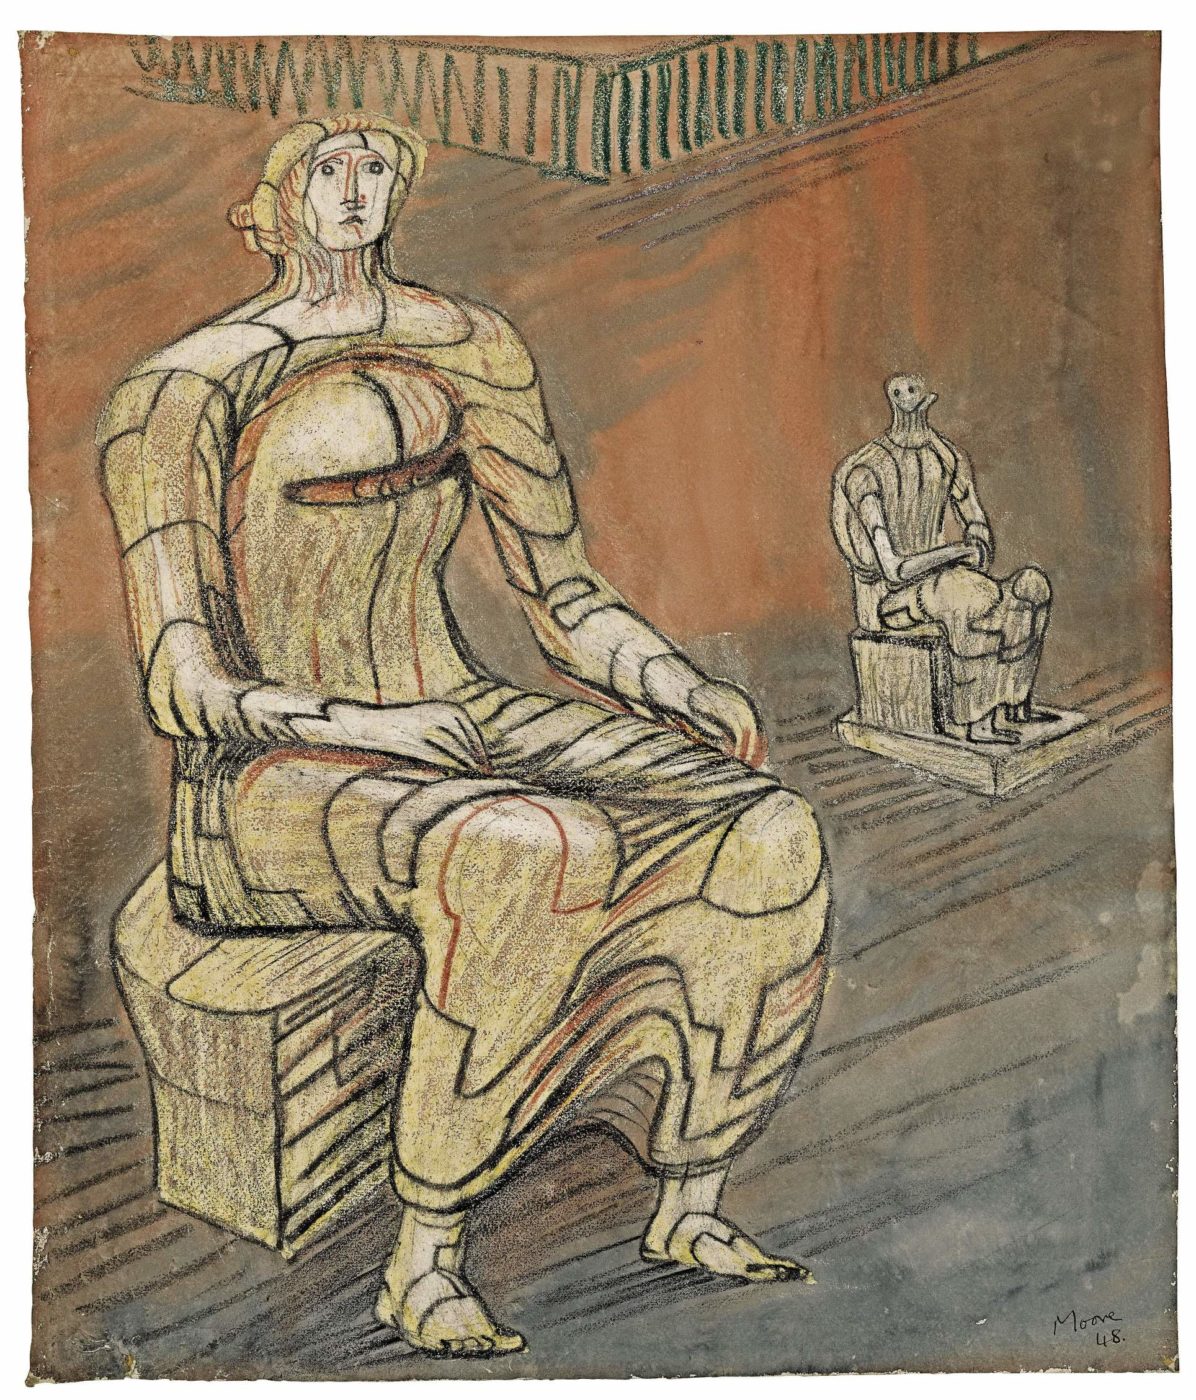 Henry Moore, OM CH (1898-1986), Seated Woman with Figure in Background